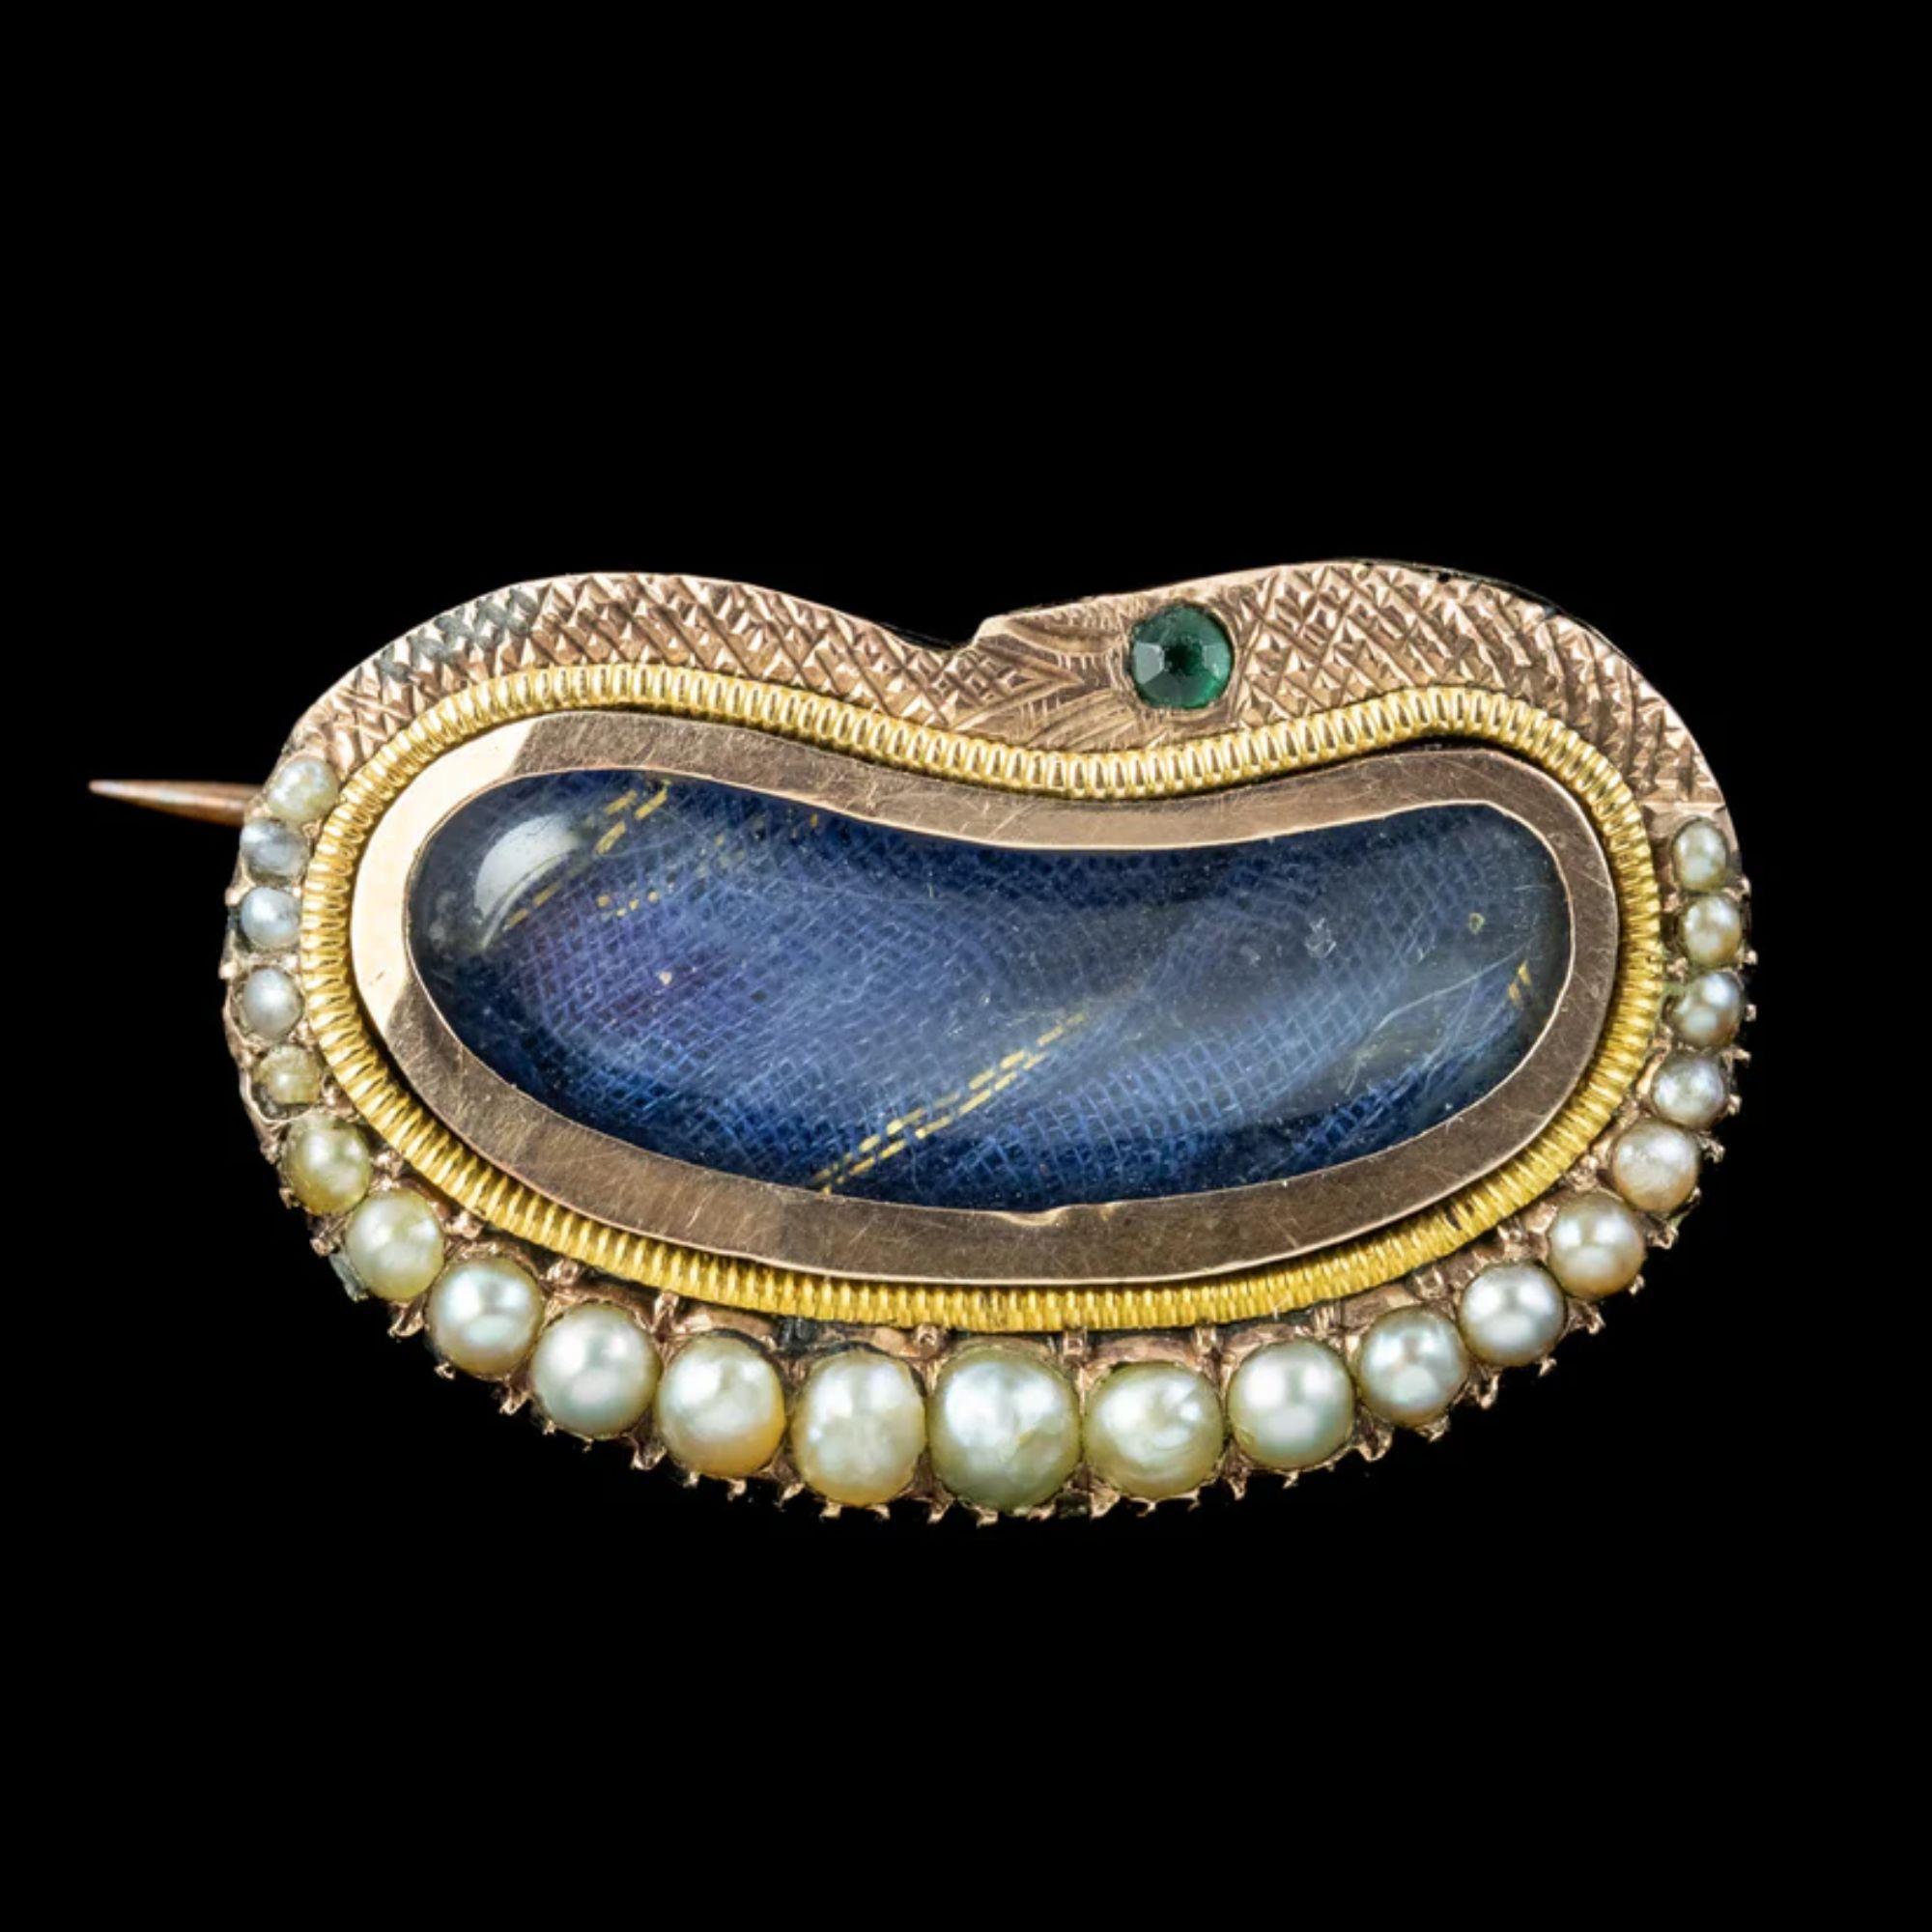 An exquisite antique Georgian mourning brooch from the early 1800s featuring a bean-shaped window in the centre, with blue silk backing that would have traditionally held a lock of hair belonging to a deceased loved one so that a piece of them was